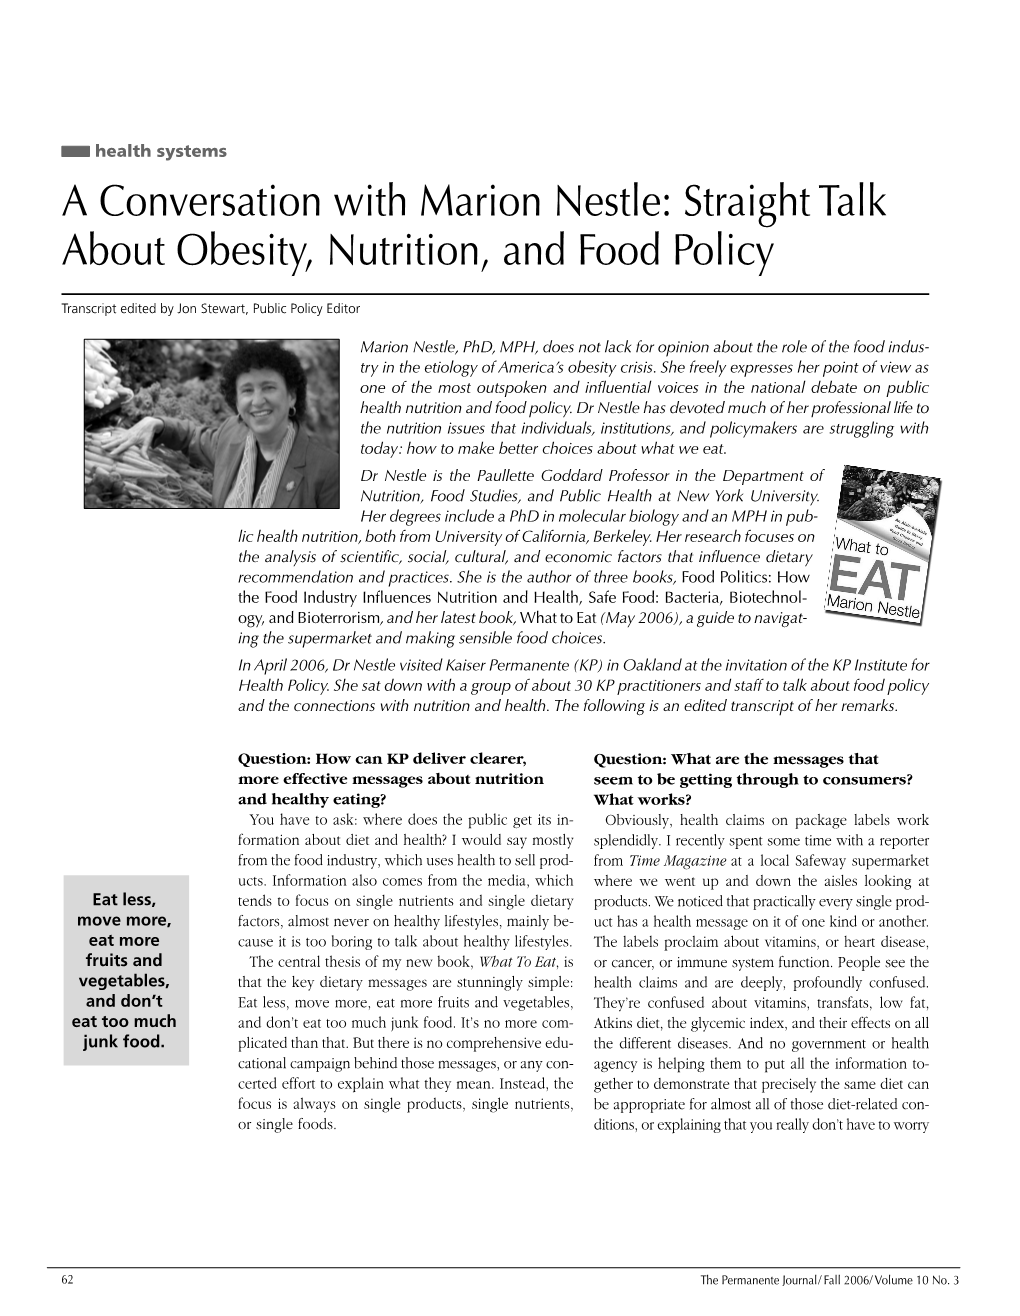 A Conversation with Marion Nestle: Straight Talk About Obesity, Nutrition, and Food Policy